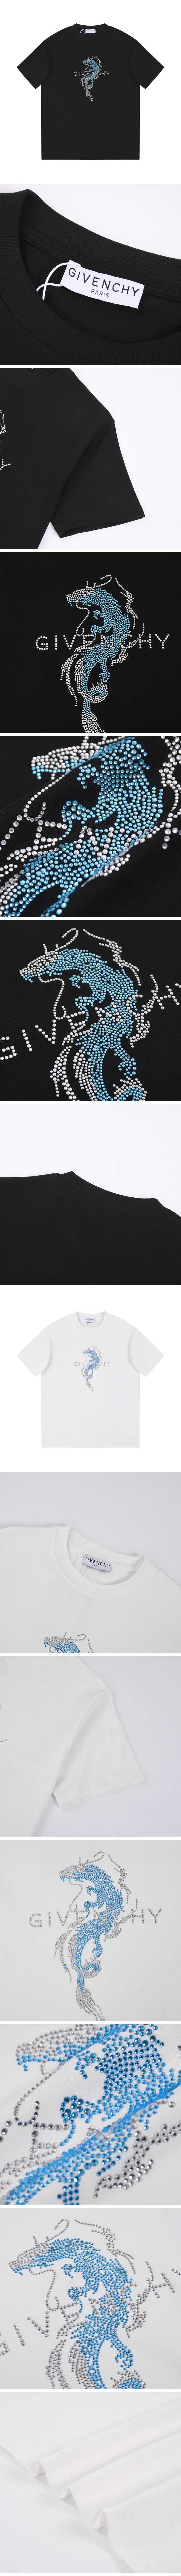 Givenchy Chest Name Logo Tee ジバンシー チェスト ネーム ロゴ Tシャツ